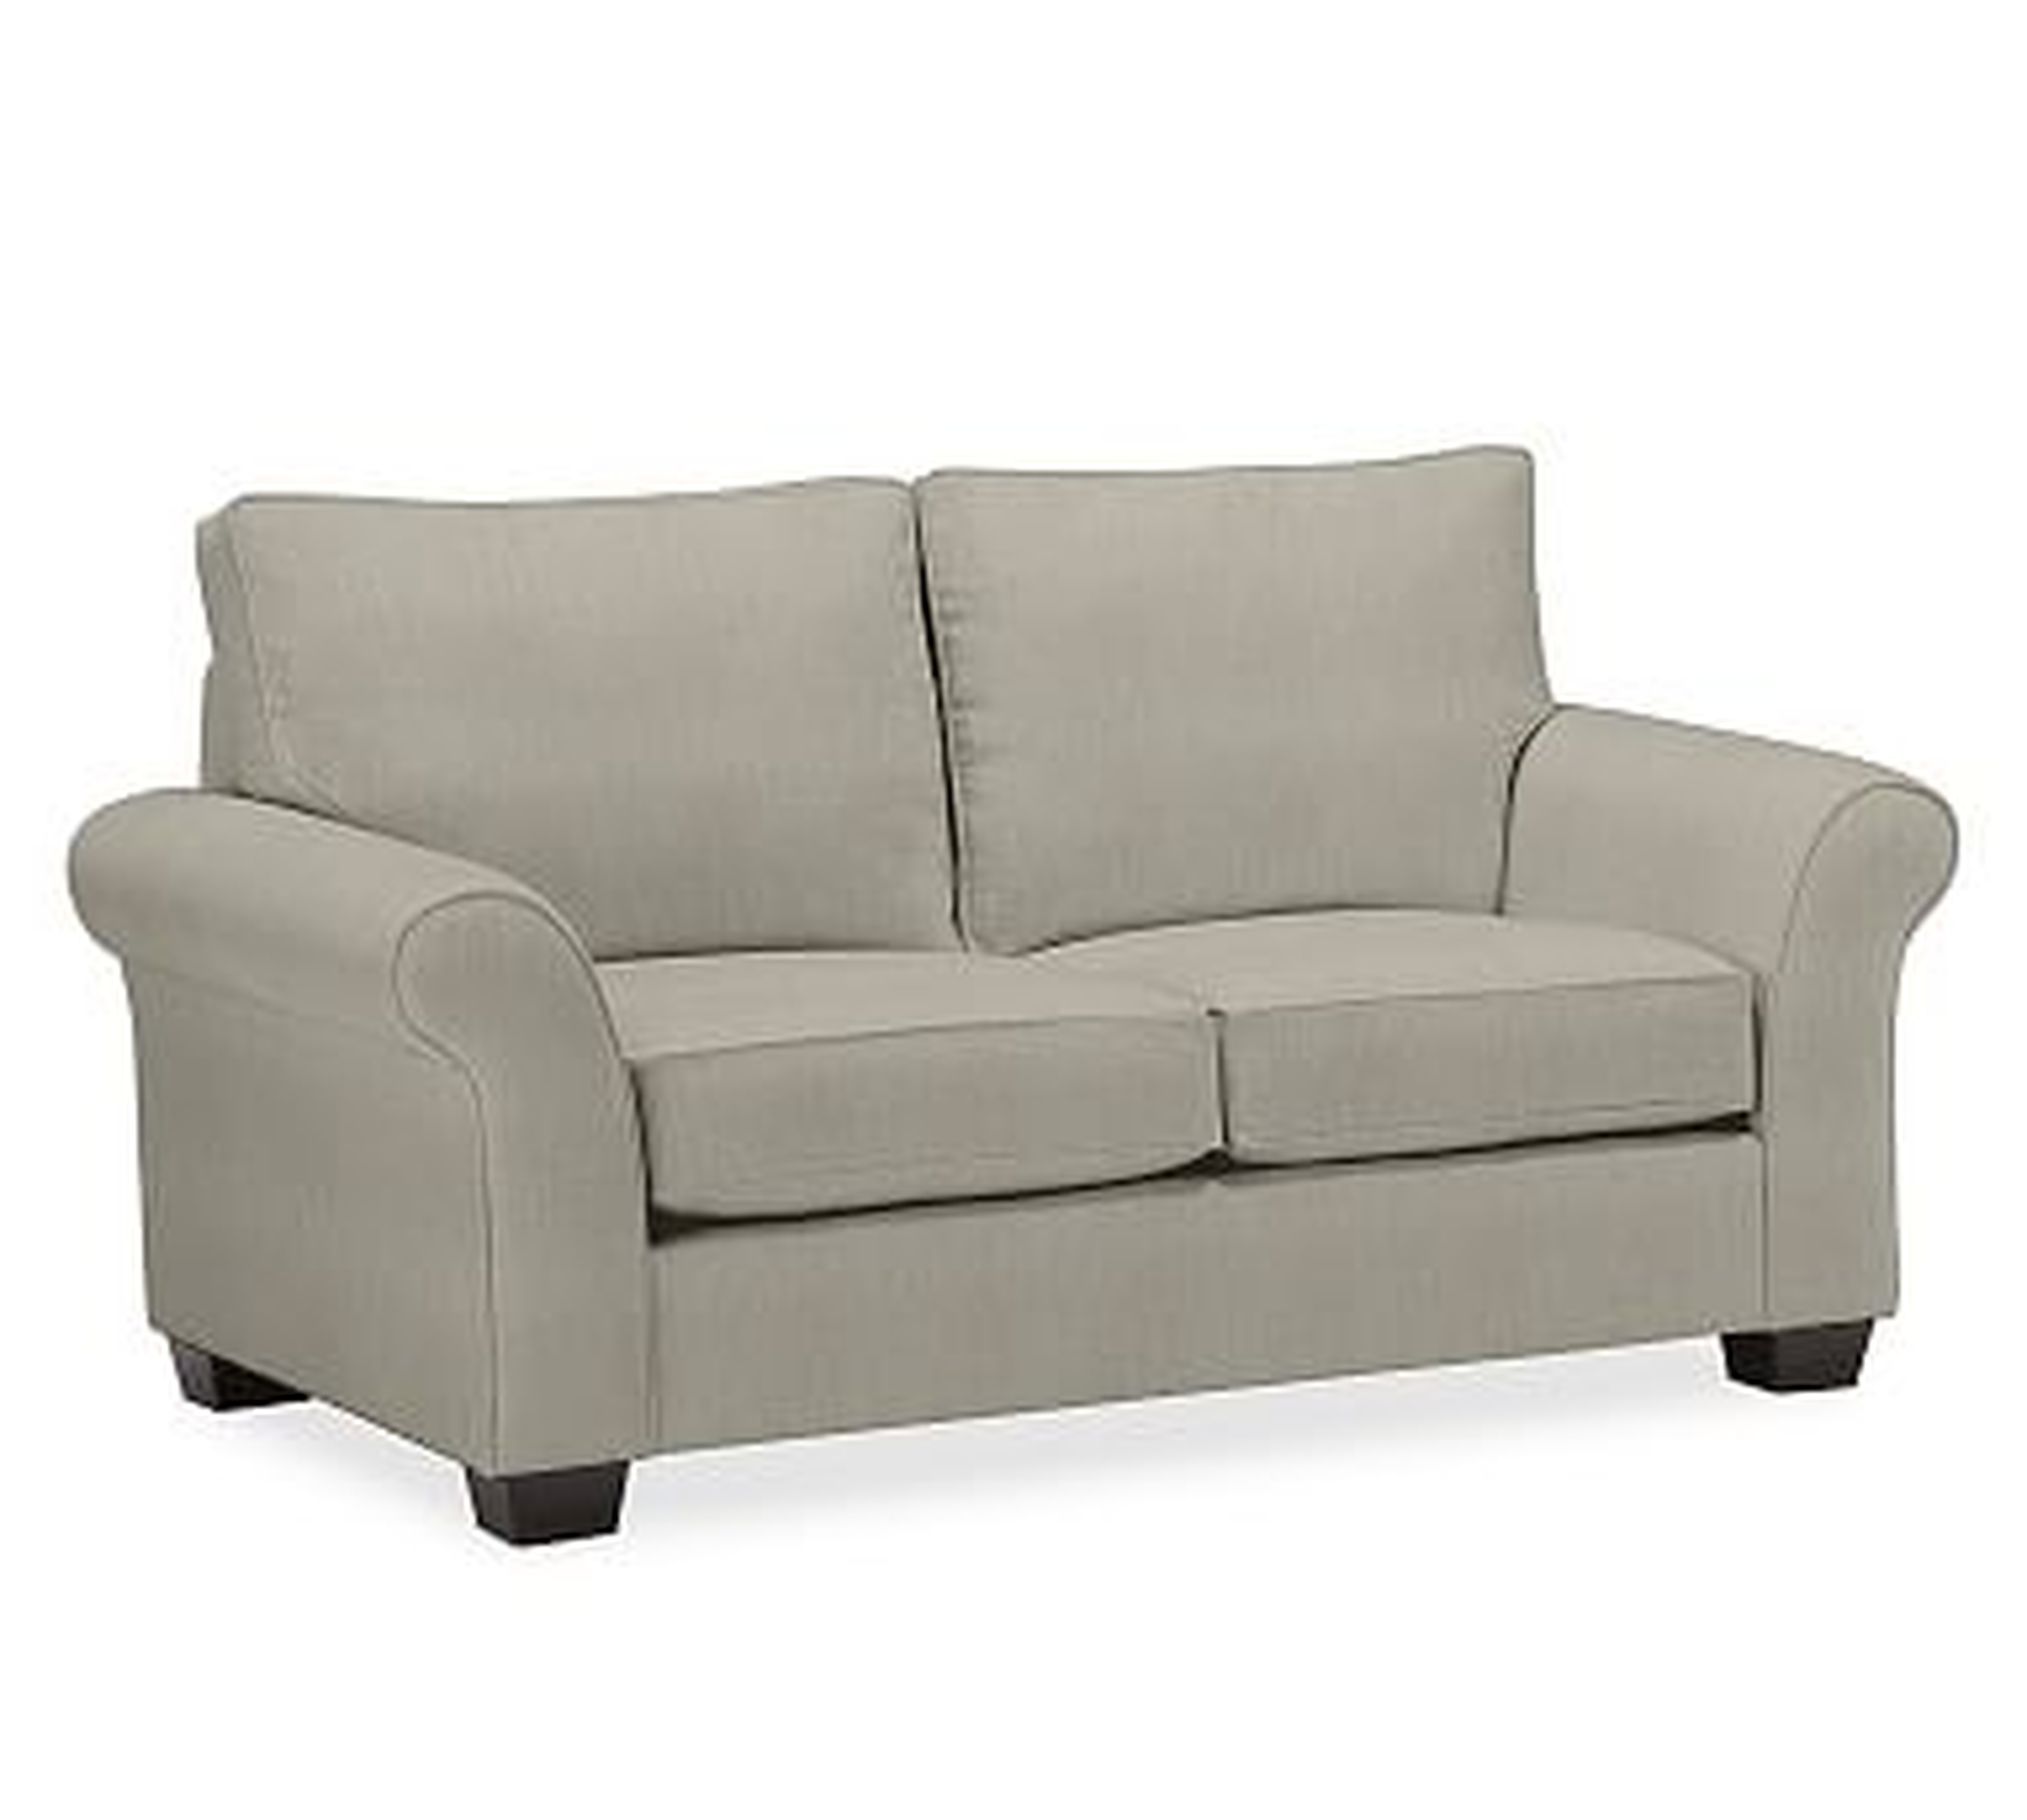 PB Comfort Roll Arm Upholstered Loveseat 64", Box Edge Memory Foam Cushions, Performance Tweed Silver Taupe - Pottery Barn